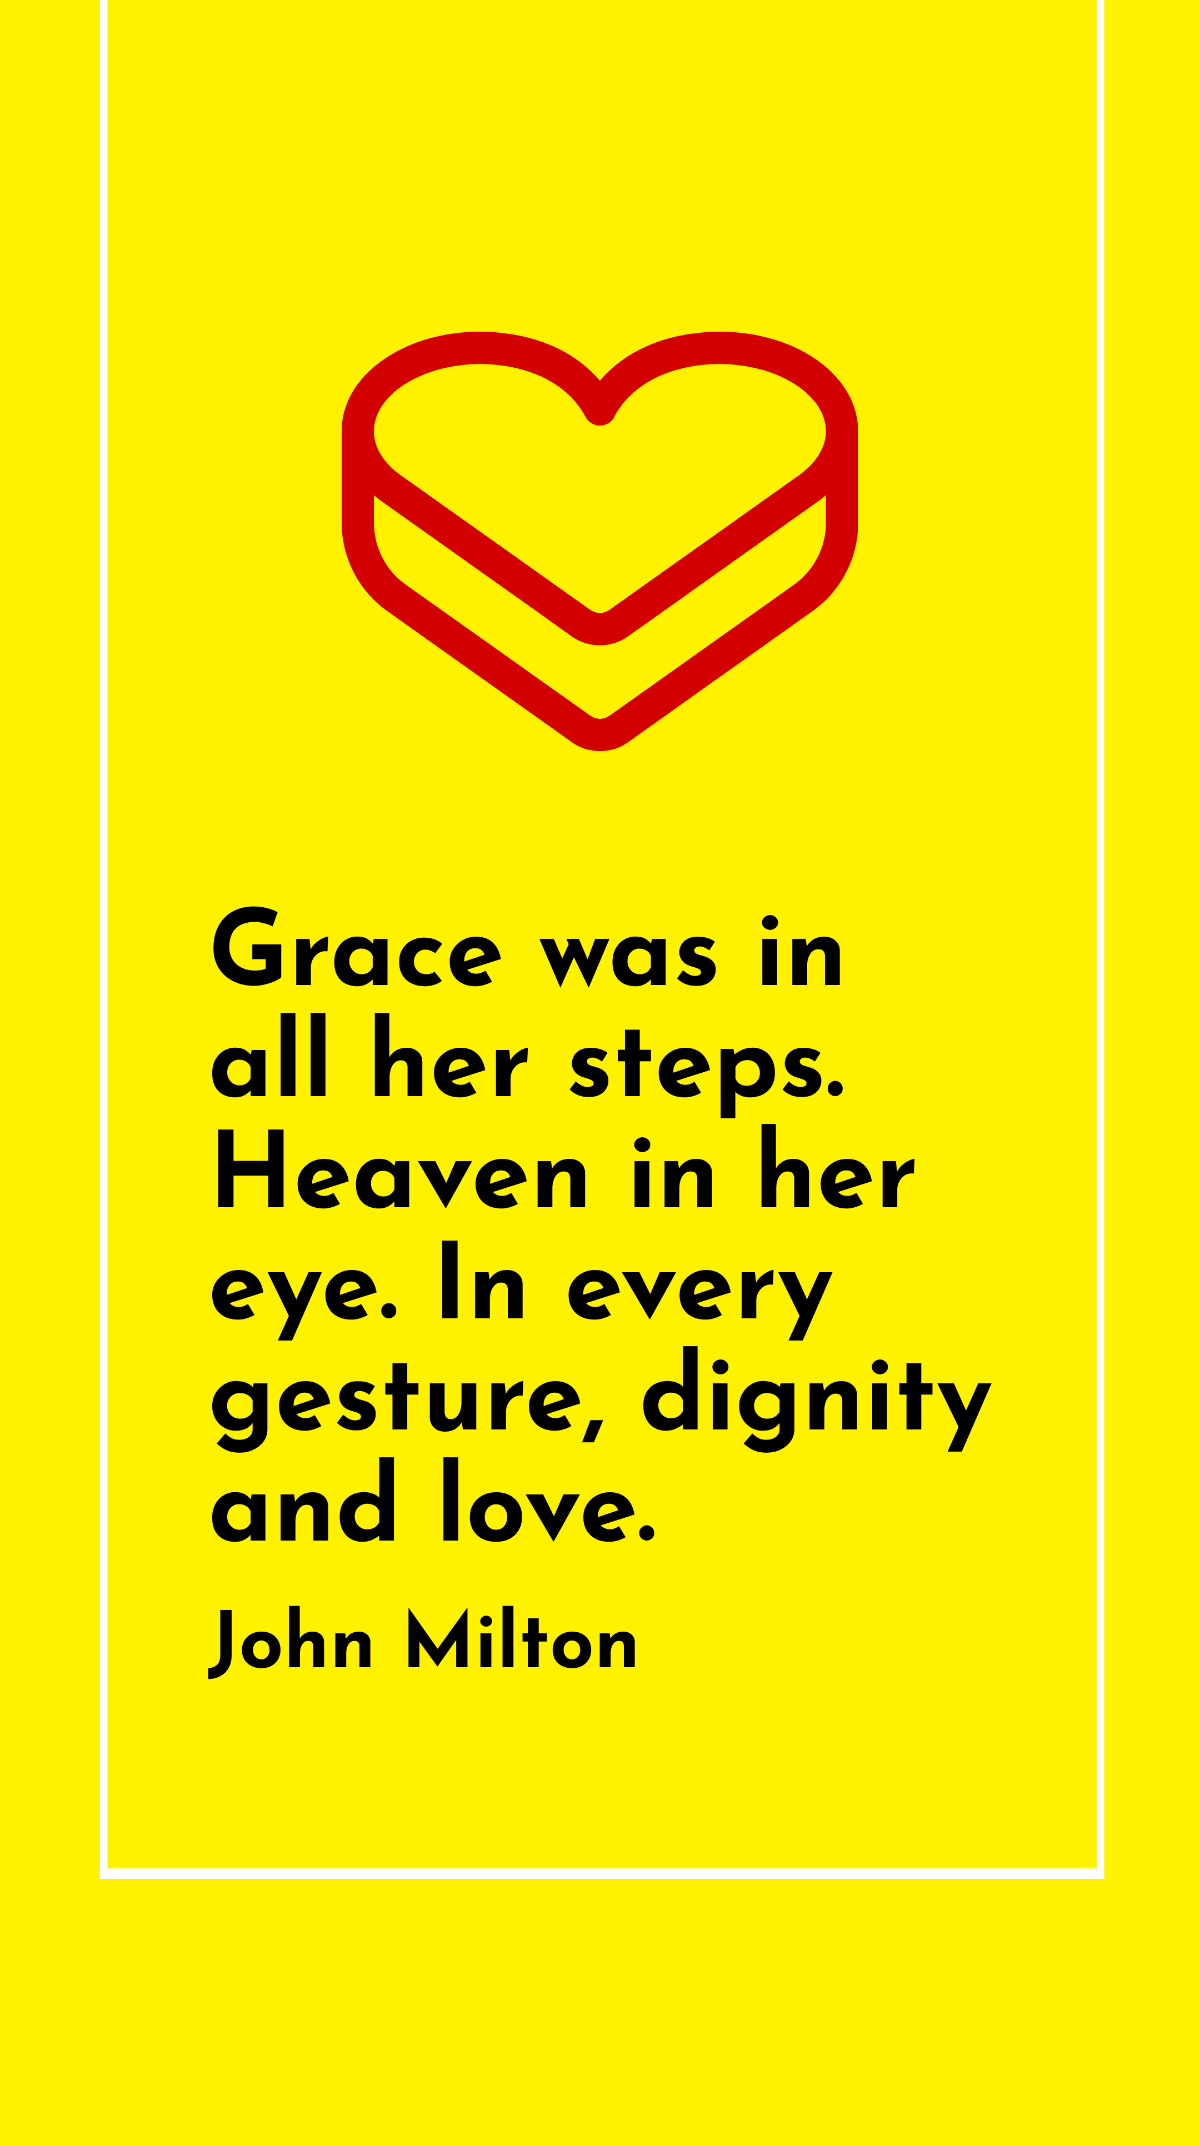 John Milton - Grace was in all her steps. Heaven in her eye. In every gesture, dignity and love.